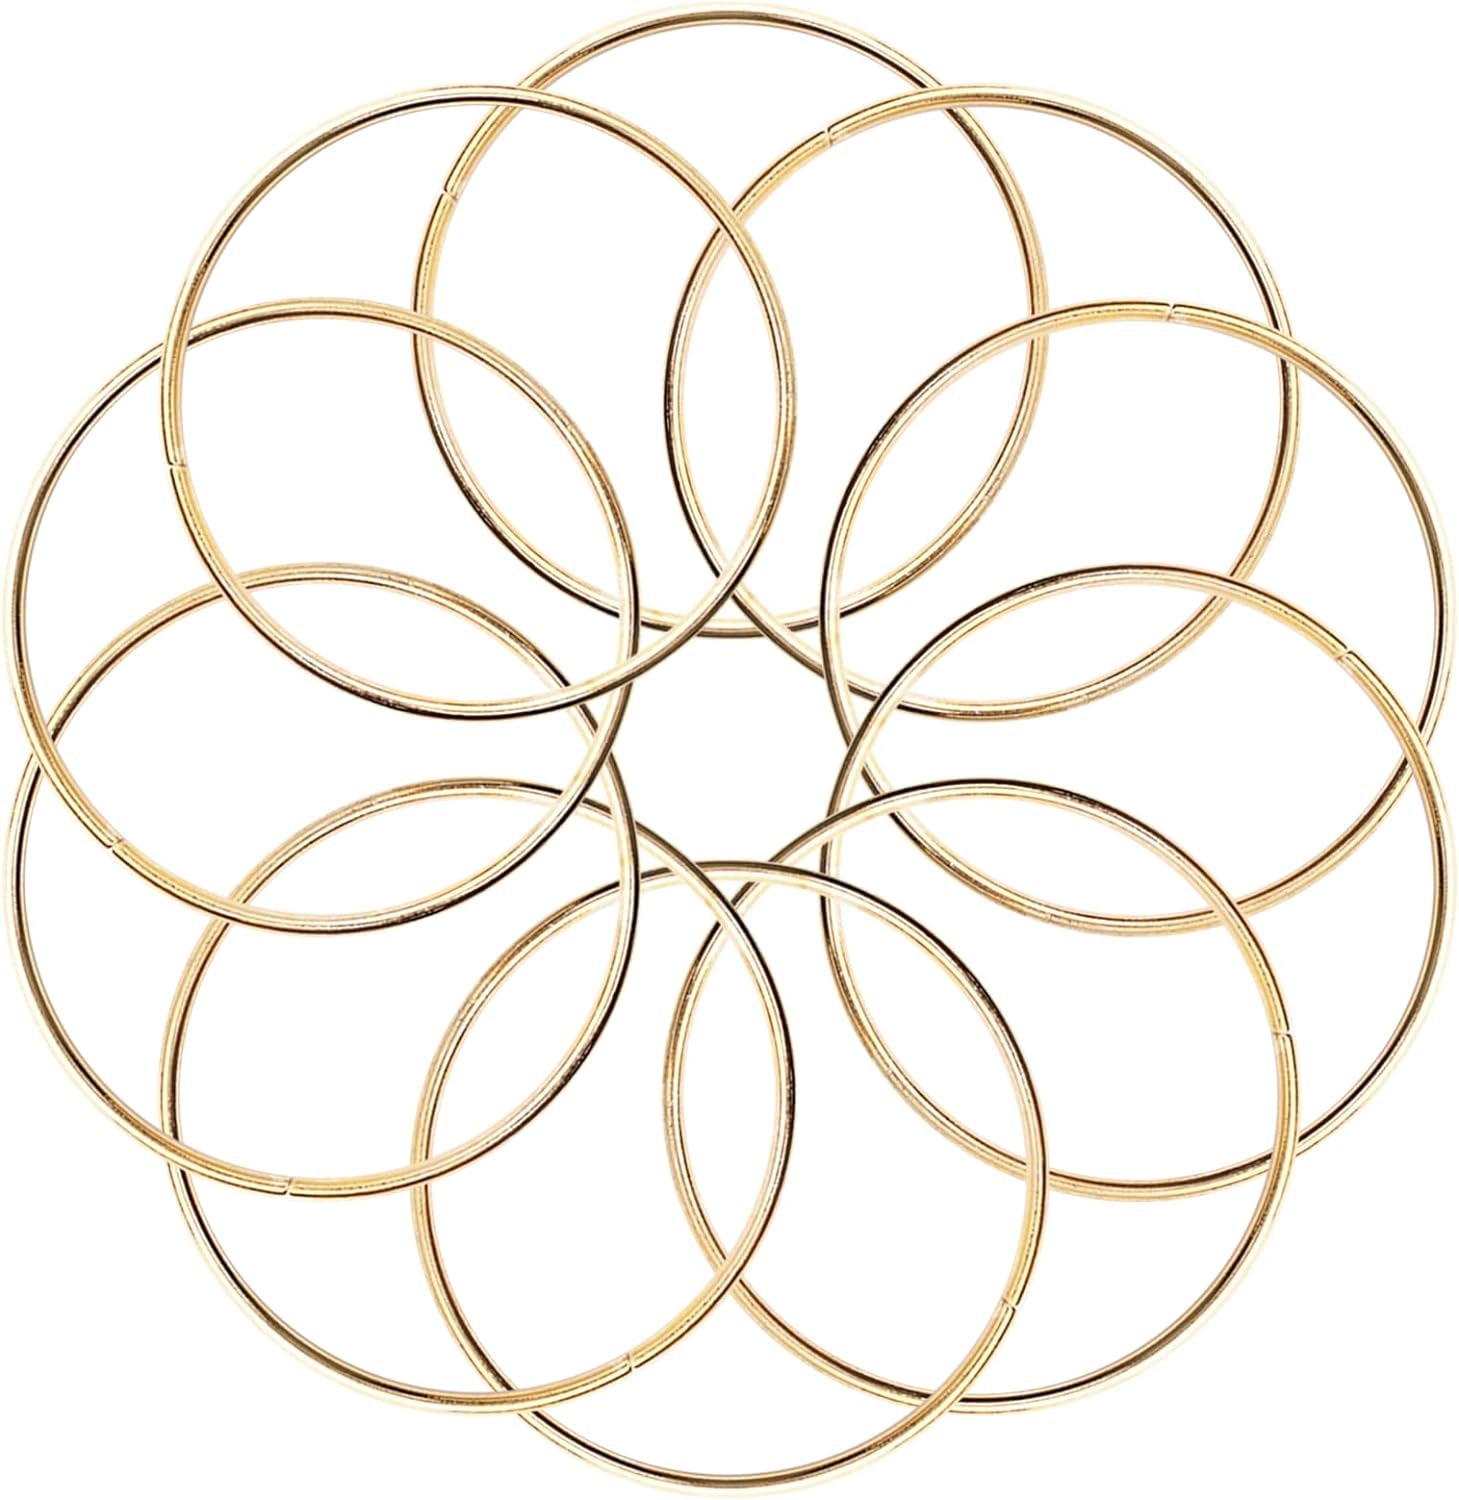 20 Pcs 3 Inch Metal Rings for Craft Gold Hoops Floral Macrame Hoops Rings for DIY Crafts Macrame Dream Catcher Supplies(Gold,3 Inch)